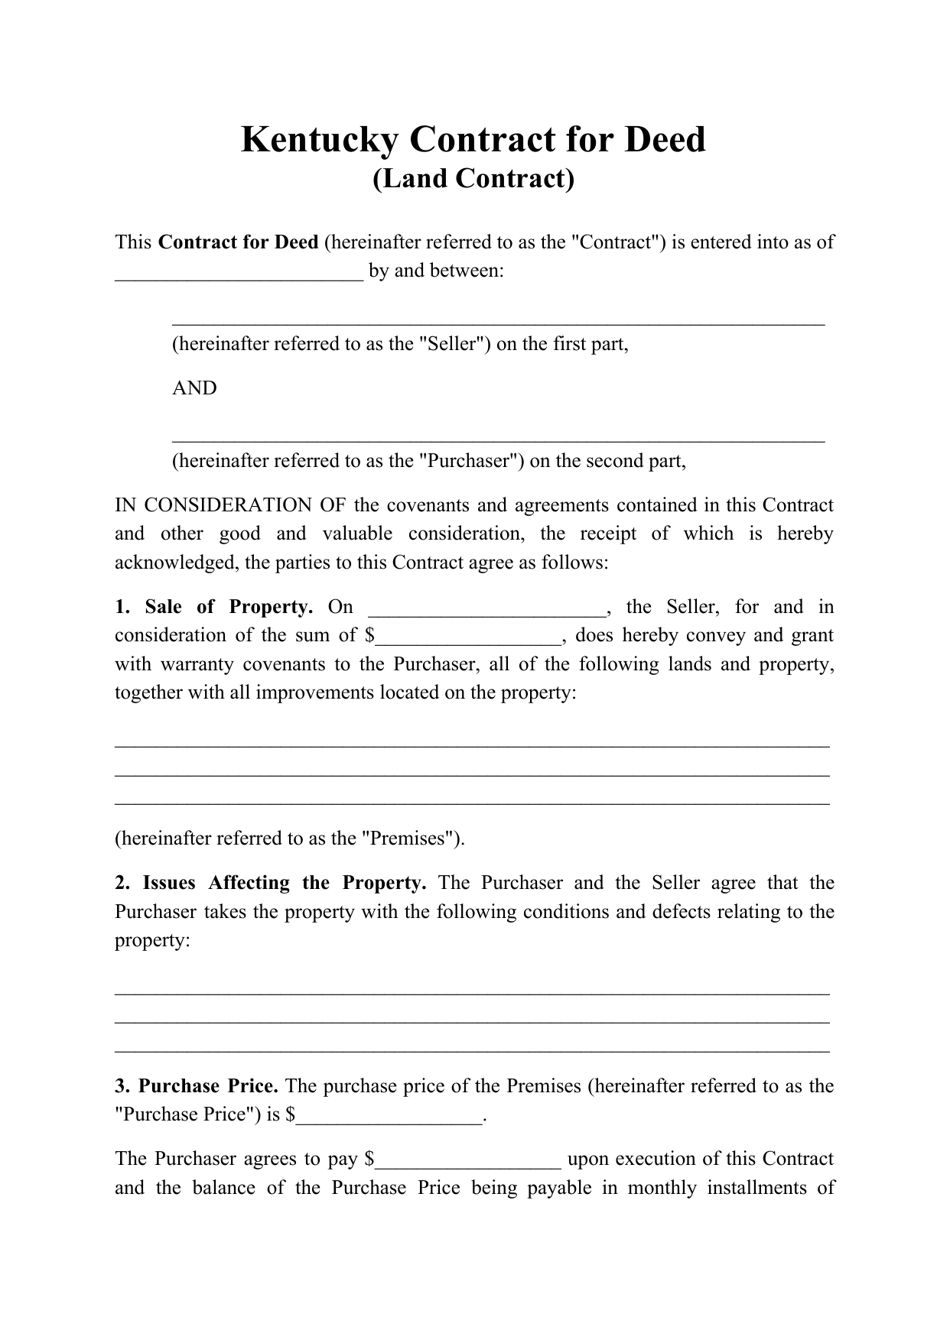 Contract for Deed (Land Contract) - Kentucky, Page 1